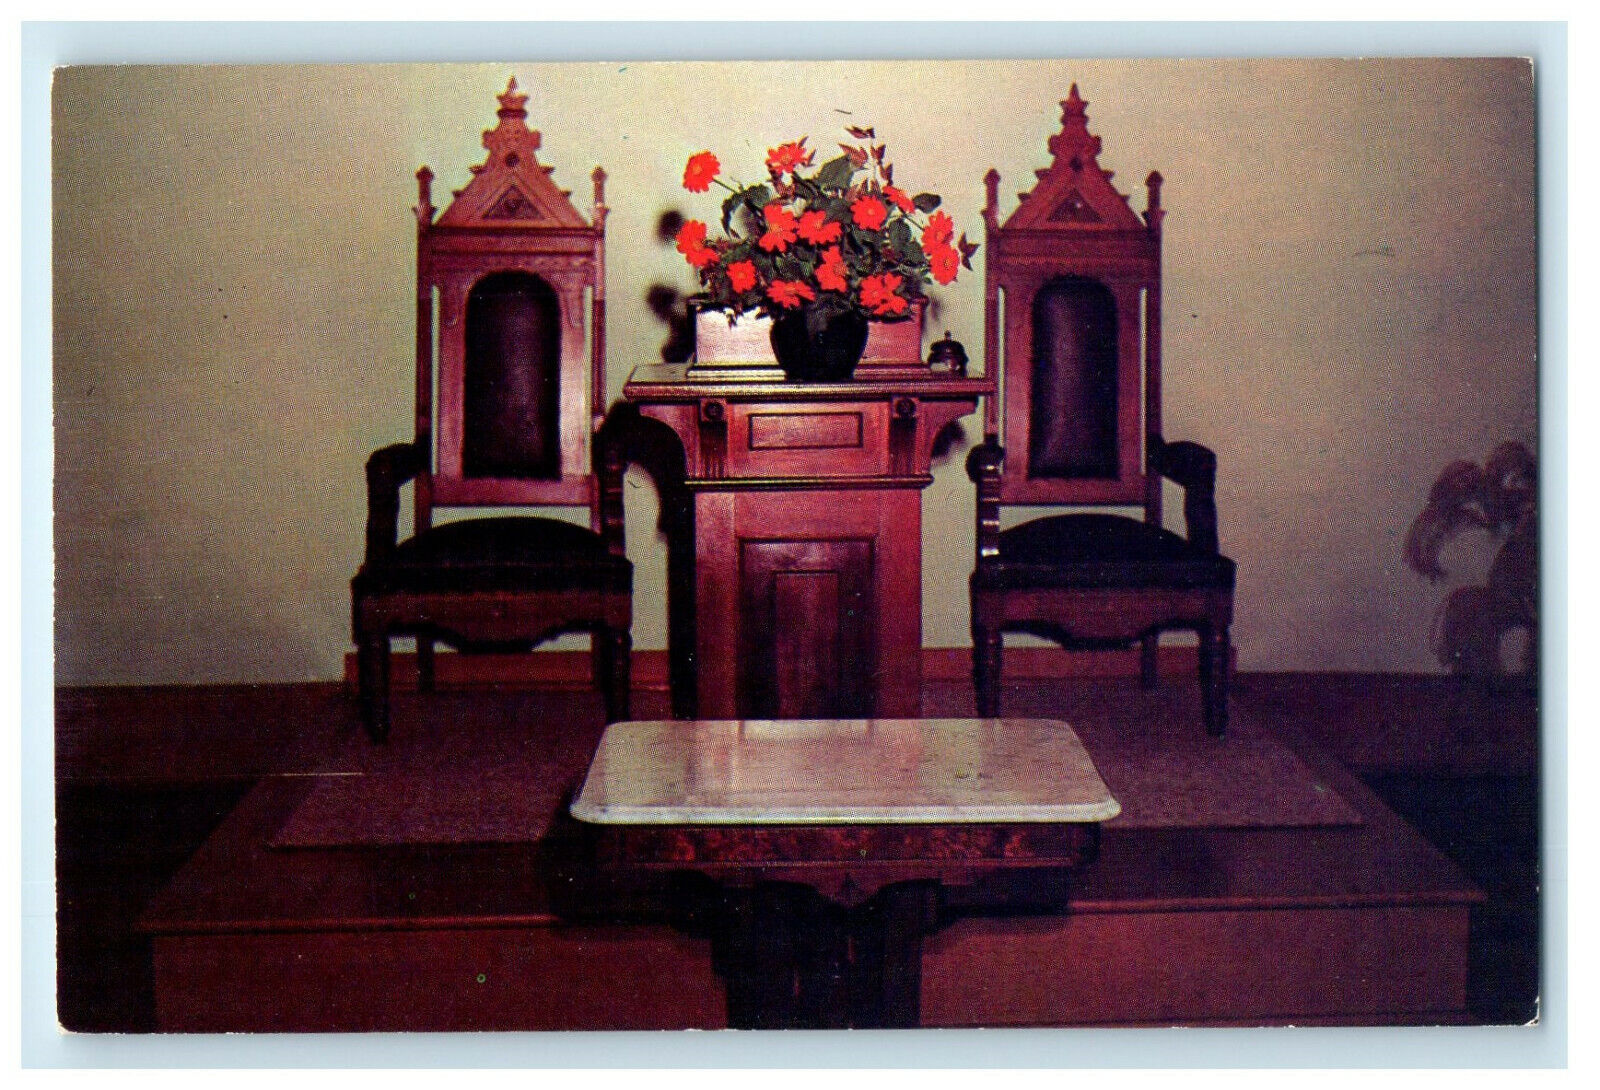 c1950s Chairs and Pulpit are from Italy, Greetings from Mooresville AL Postcard